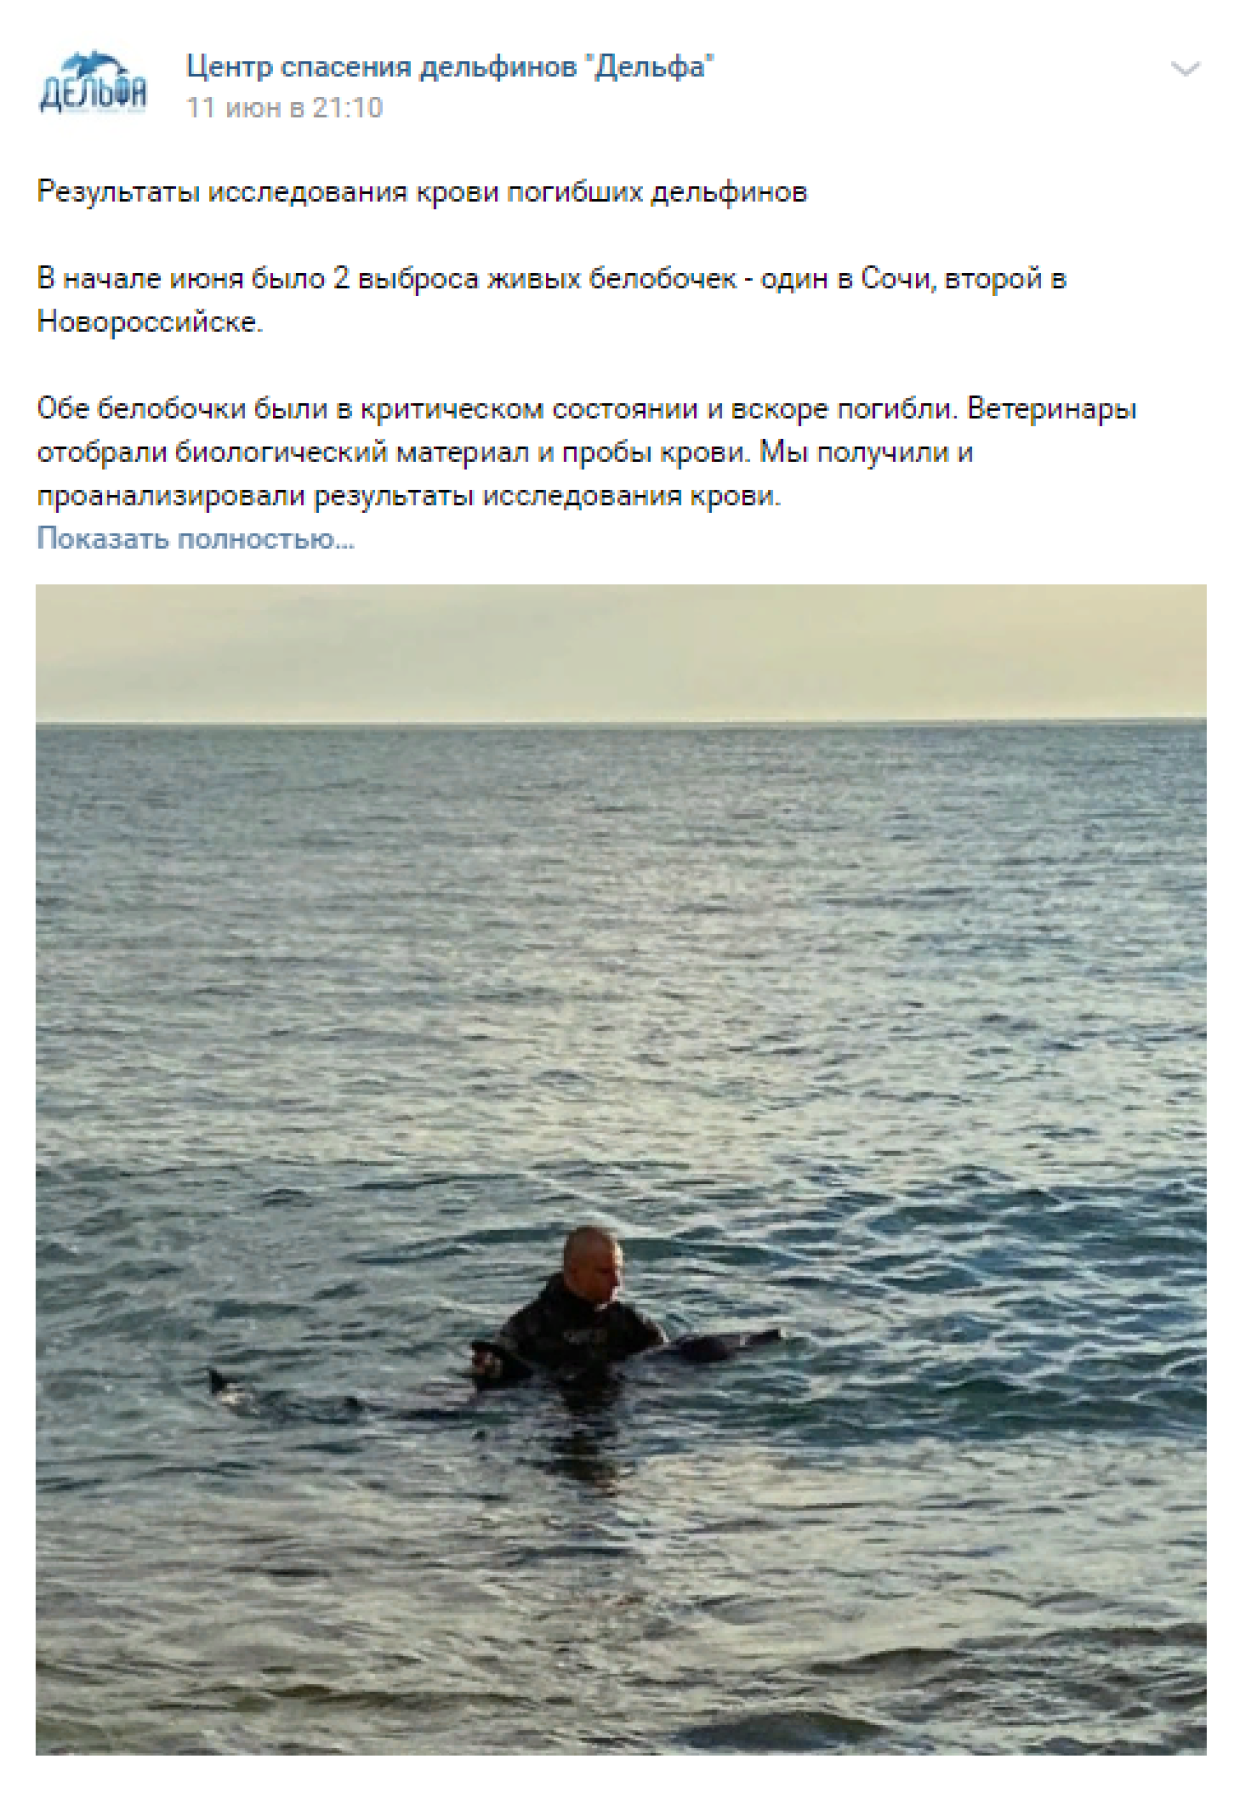 Nikolai Drozdov reacted to the death of dolphins in the Black Sea